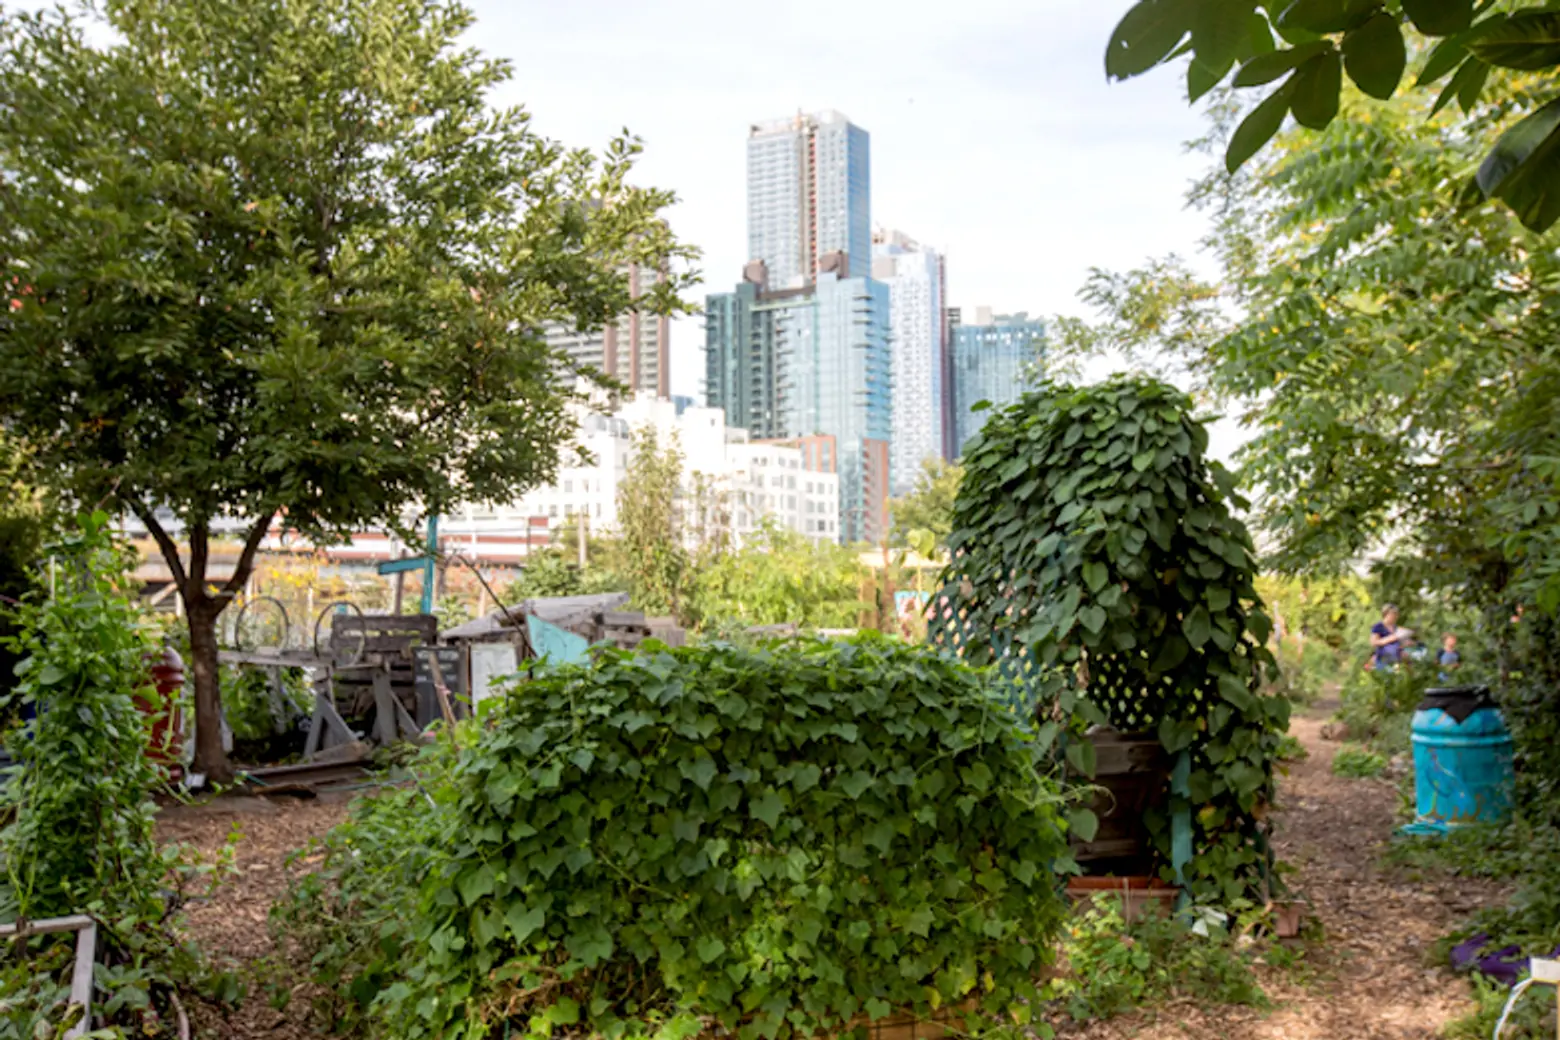 Grow a green thumb this weekend with free activities at over 70 of NYC’s community gardens